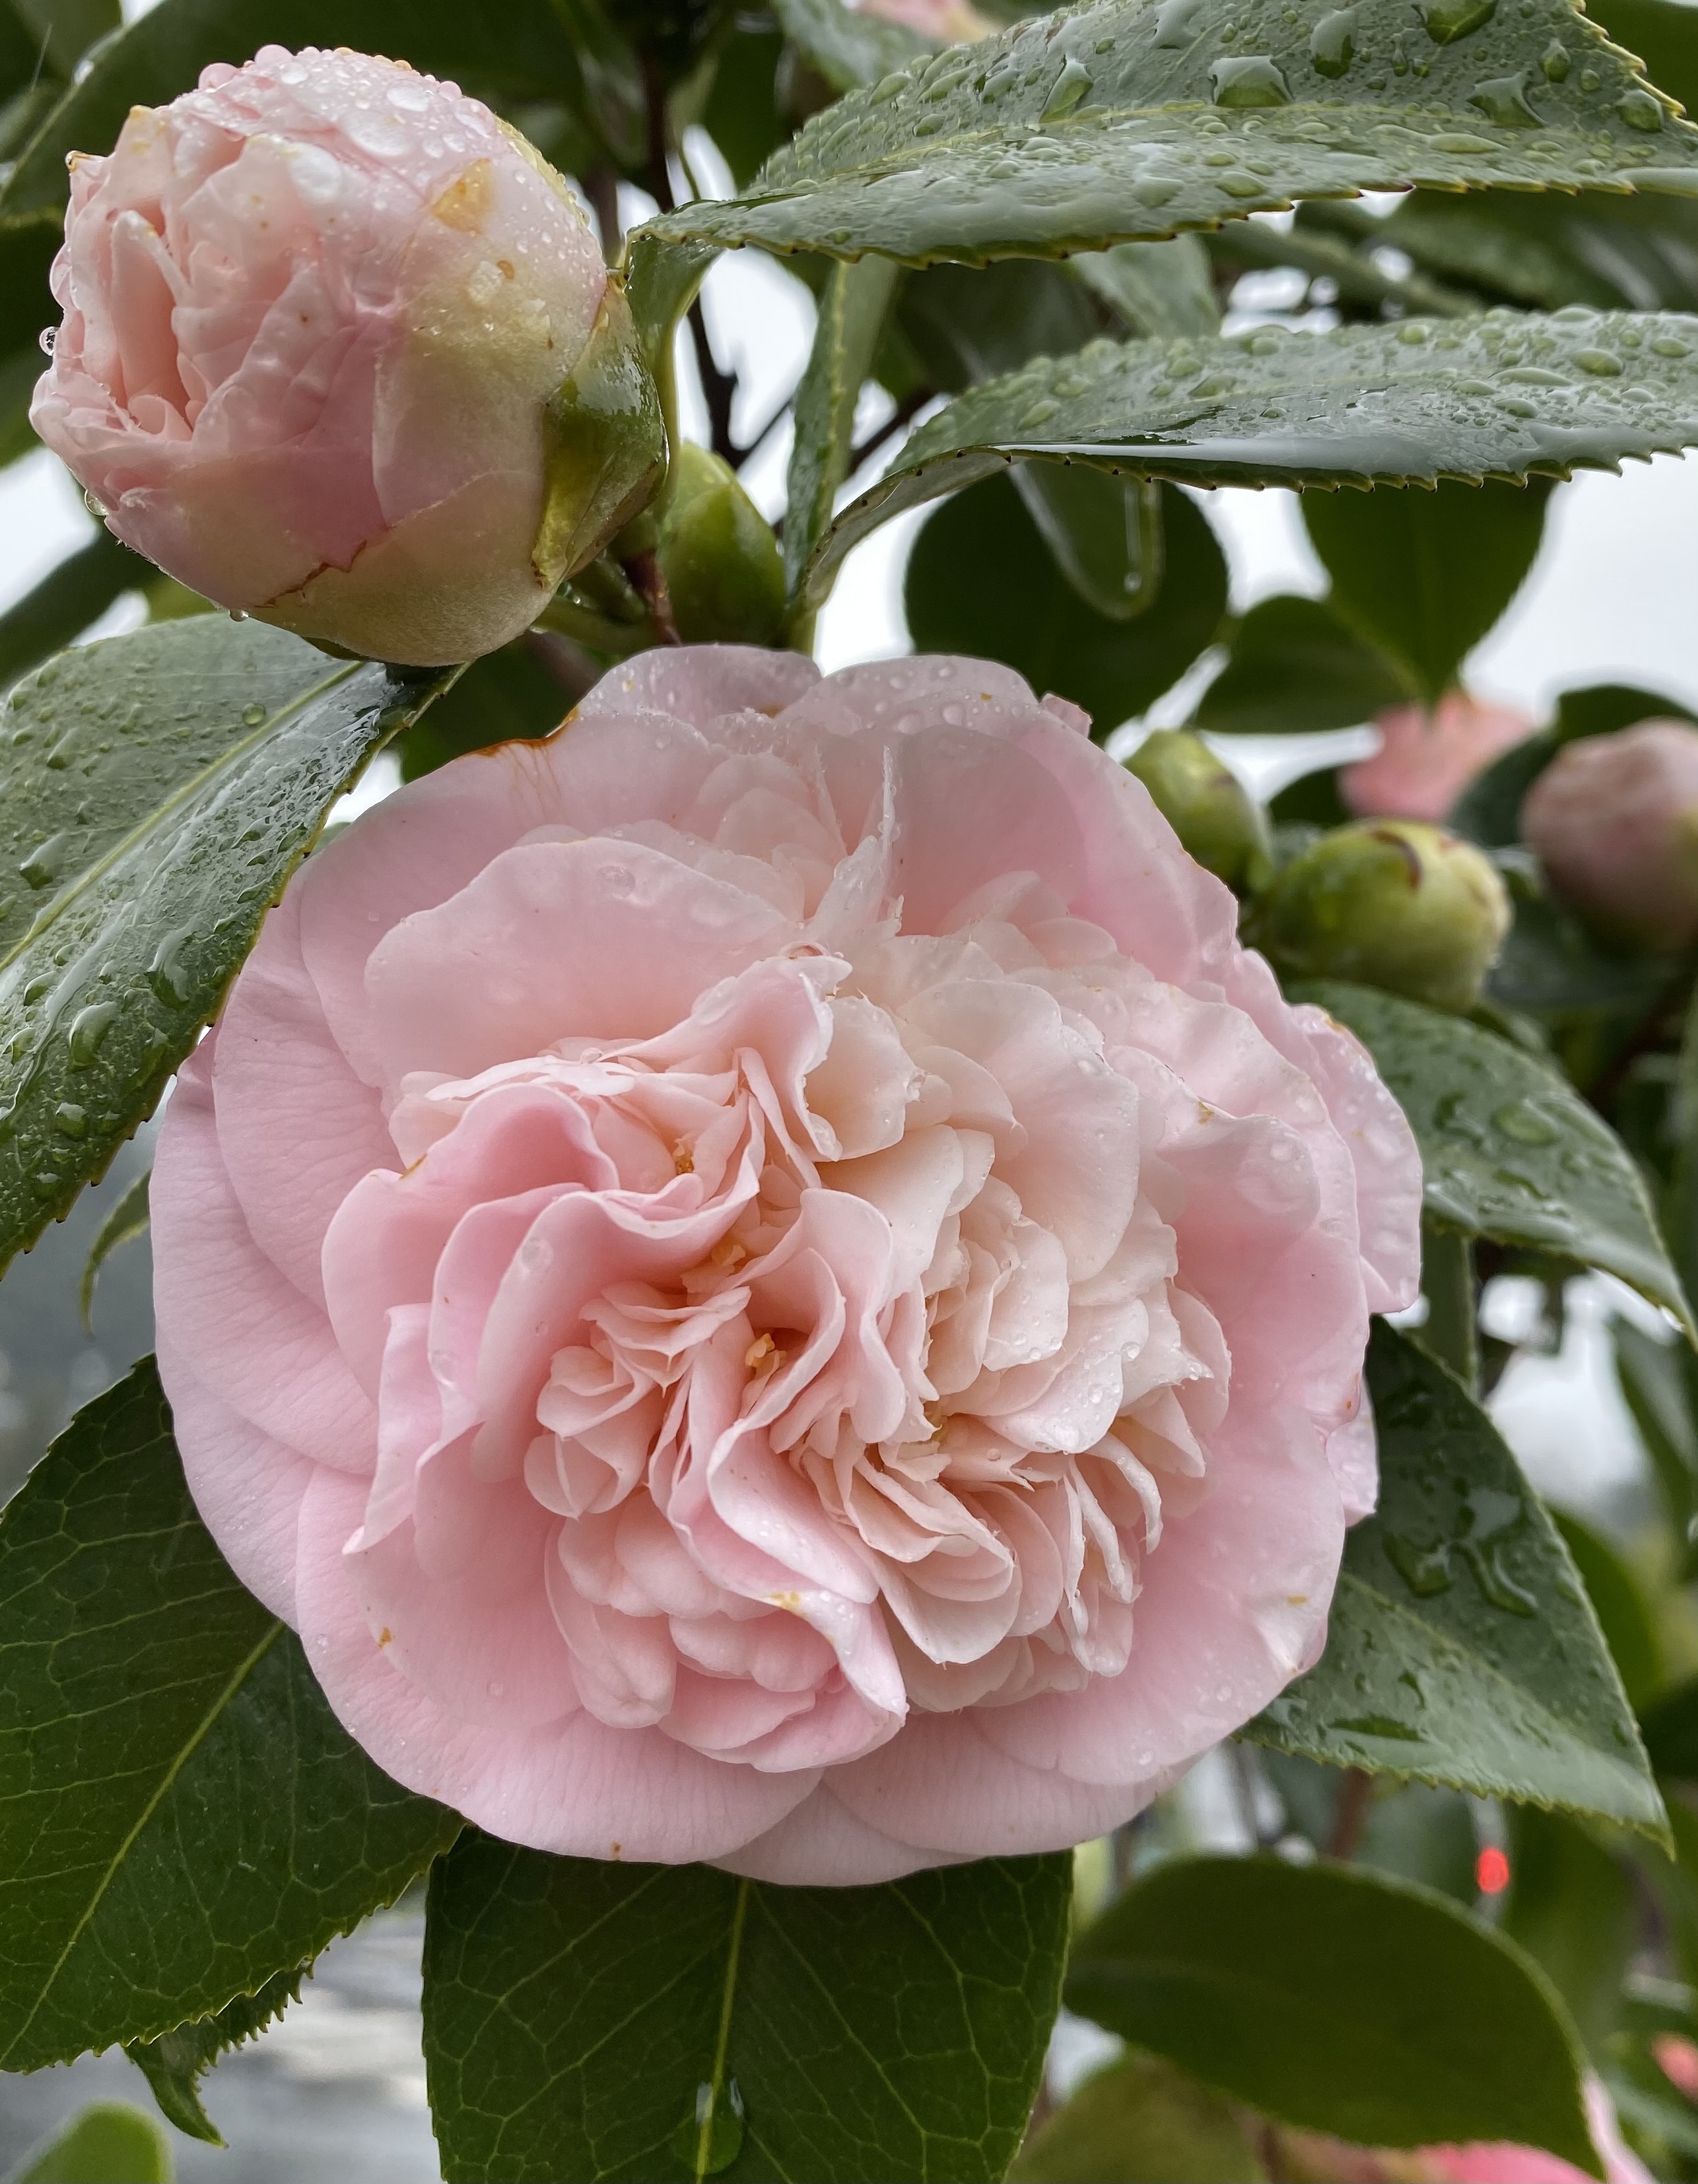 This pink camellia's petals are dense, like a peony's .